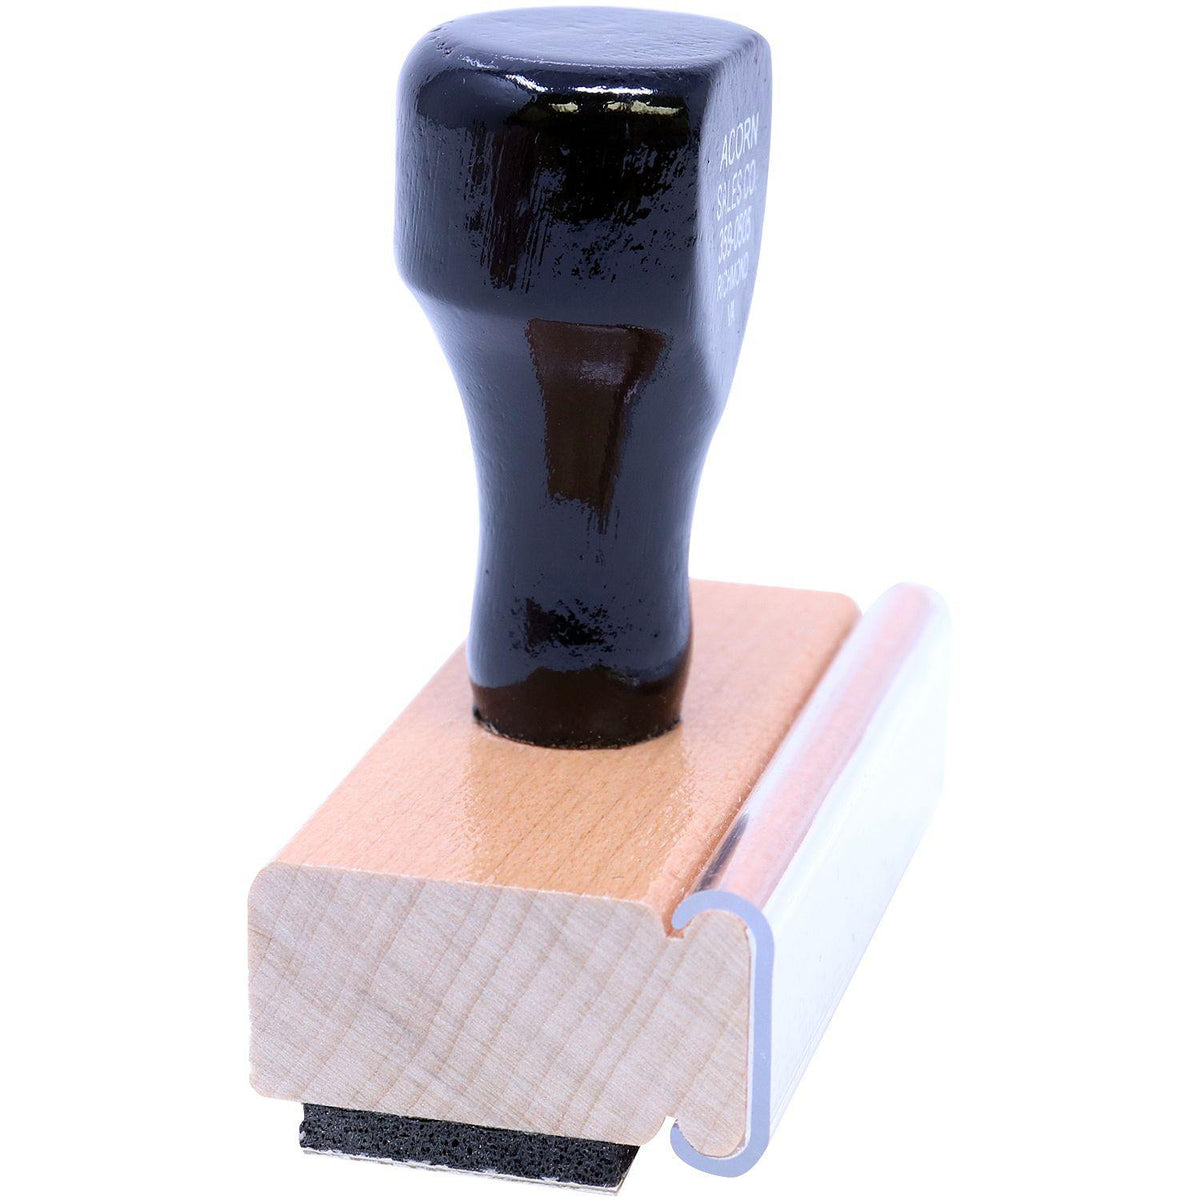 Side View of Large Narrow Font Non-Smoker Rubber Stamp at an Angle